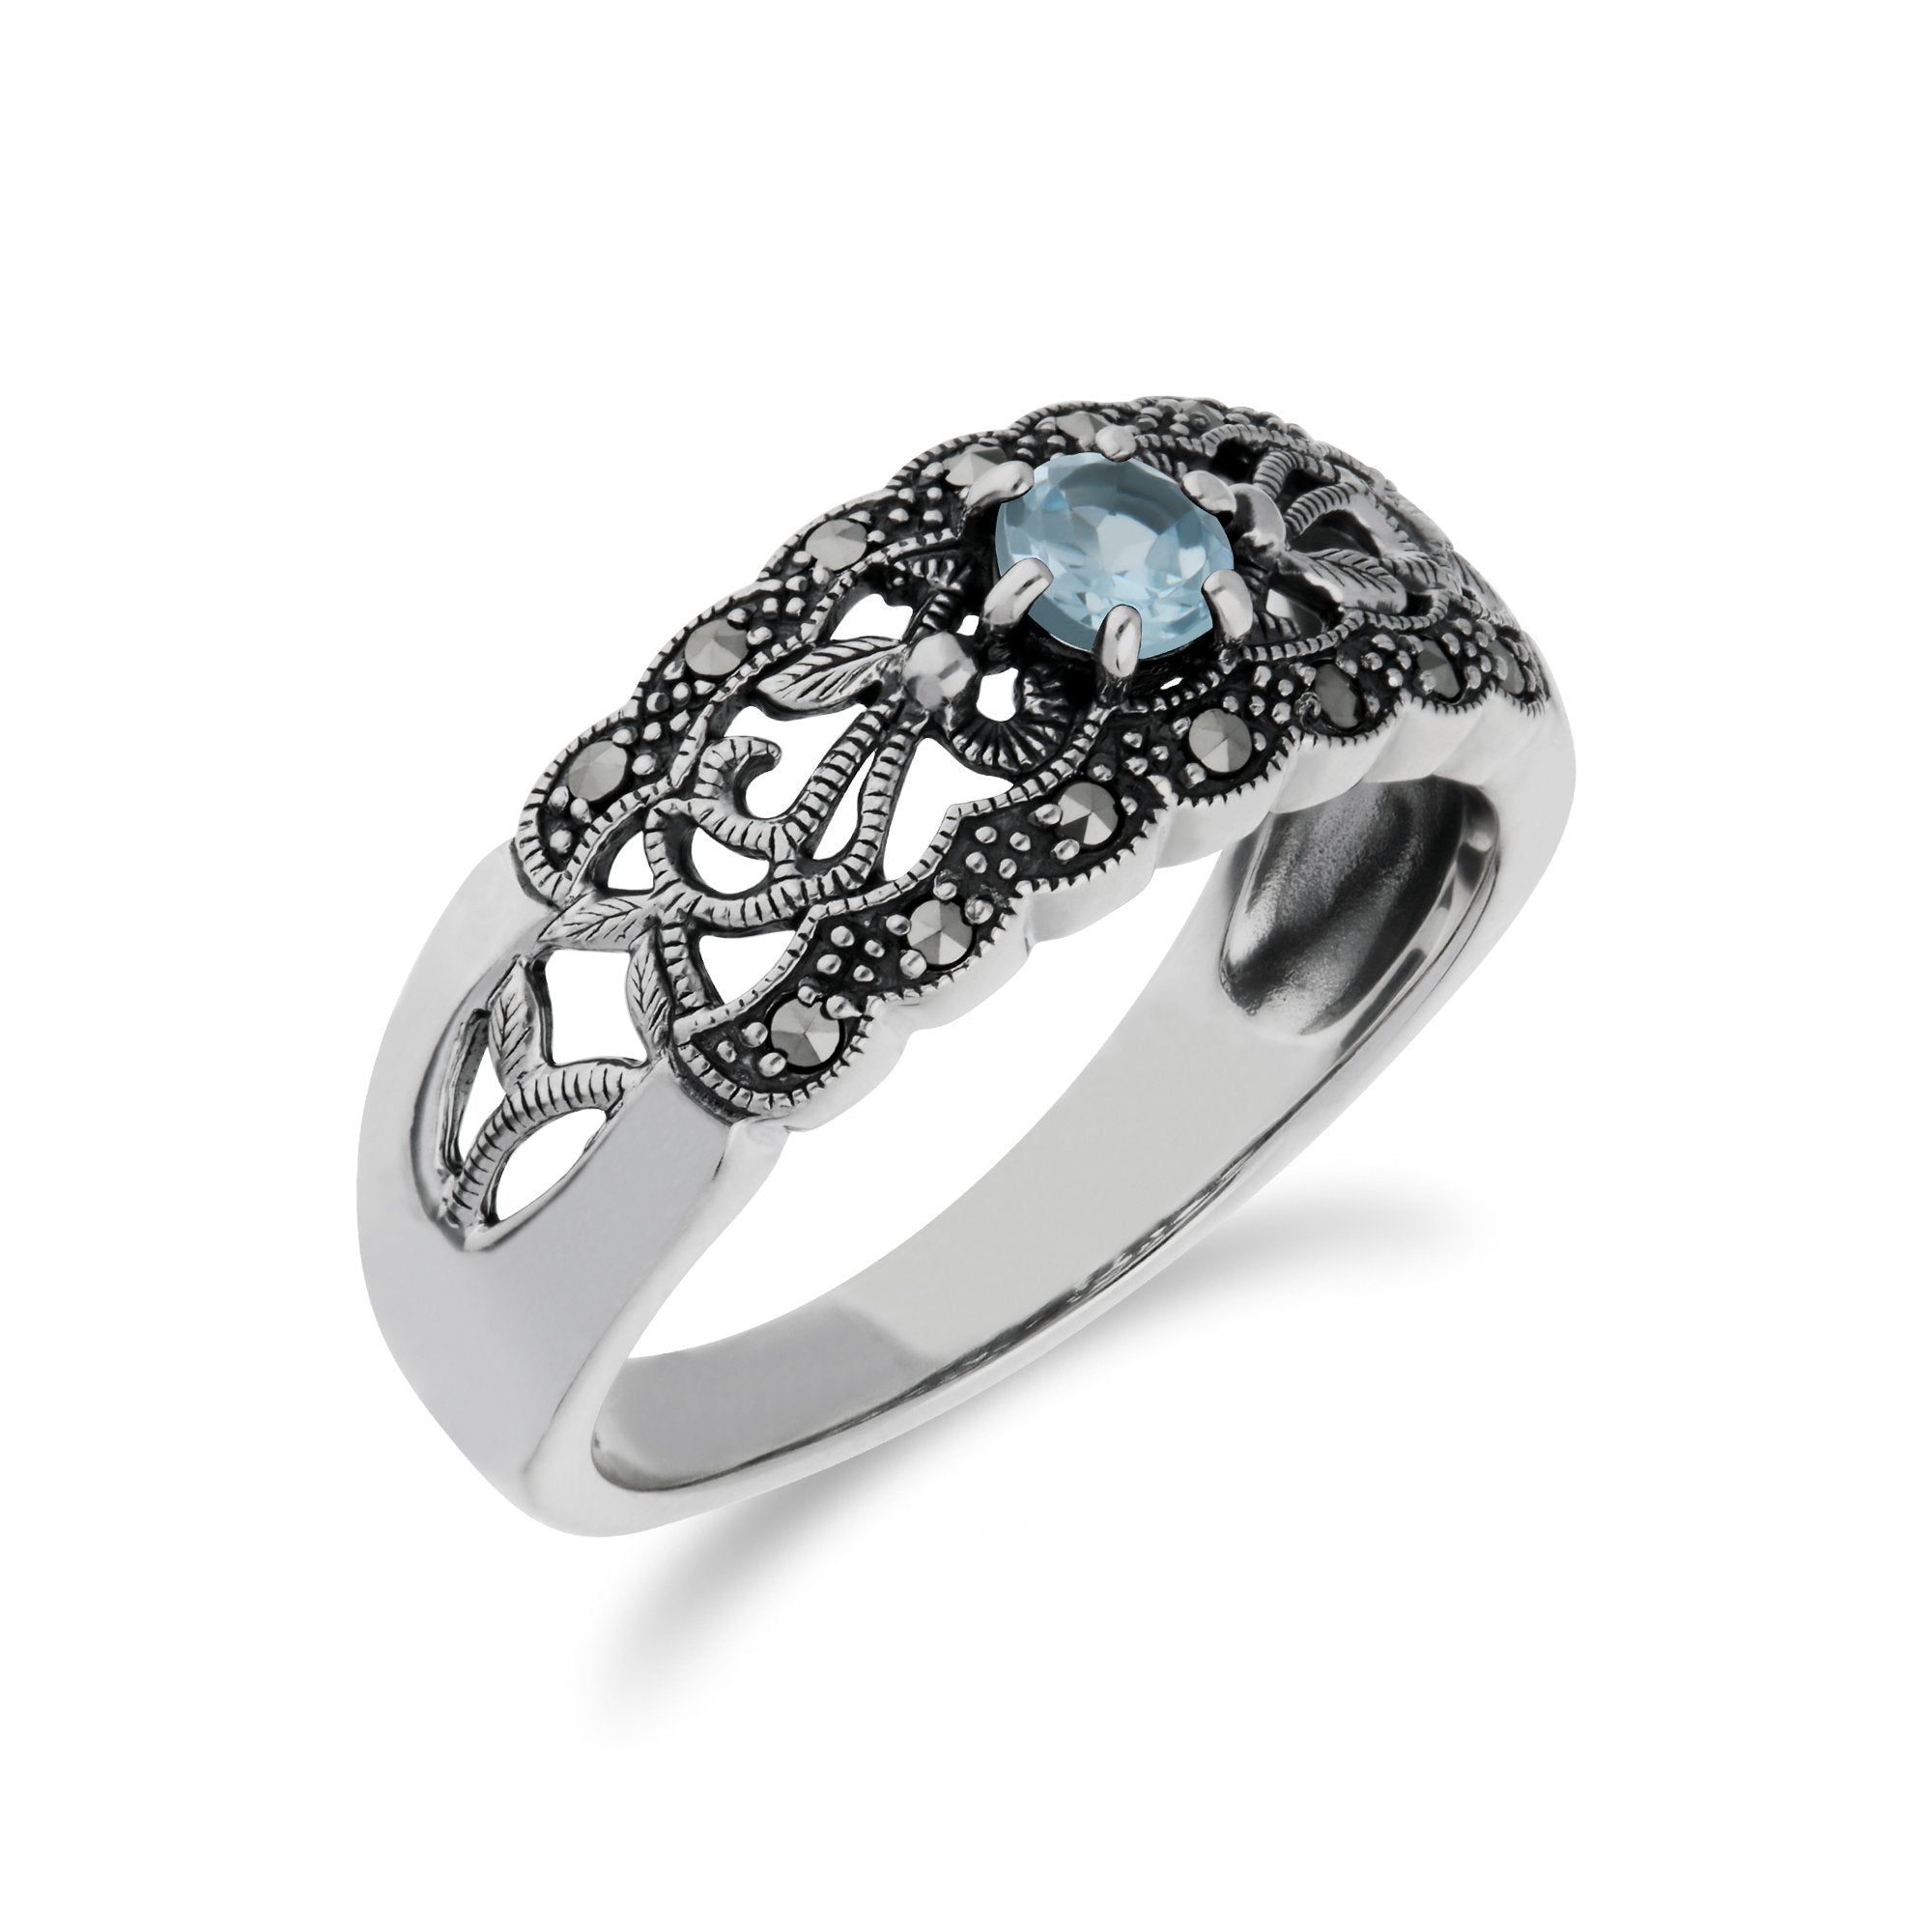 Art Nouveau Style Round Blue Topaz & Marcasite Floral Band Ring in Sterling Silver